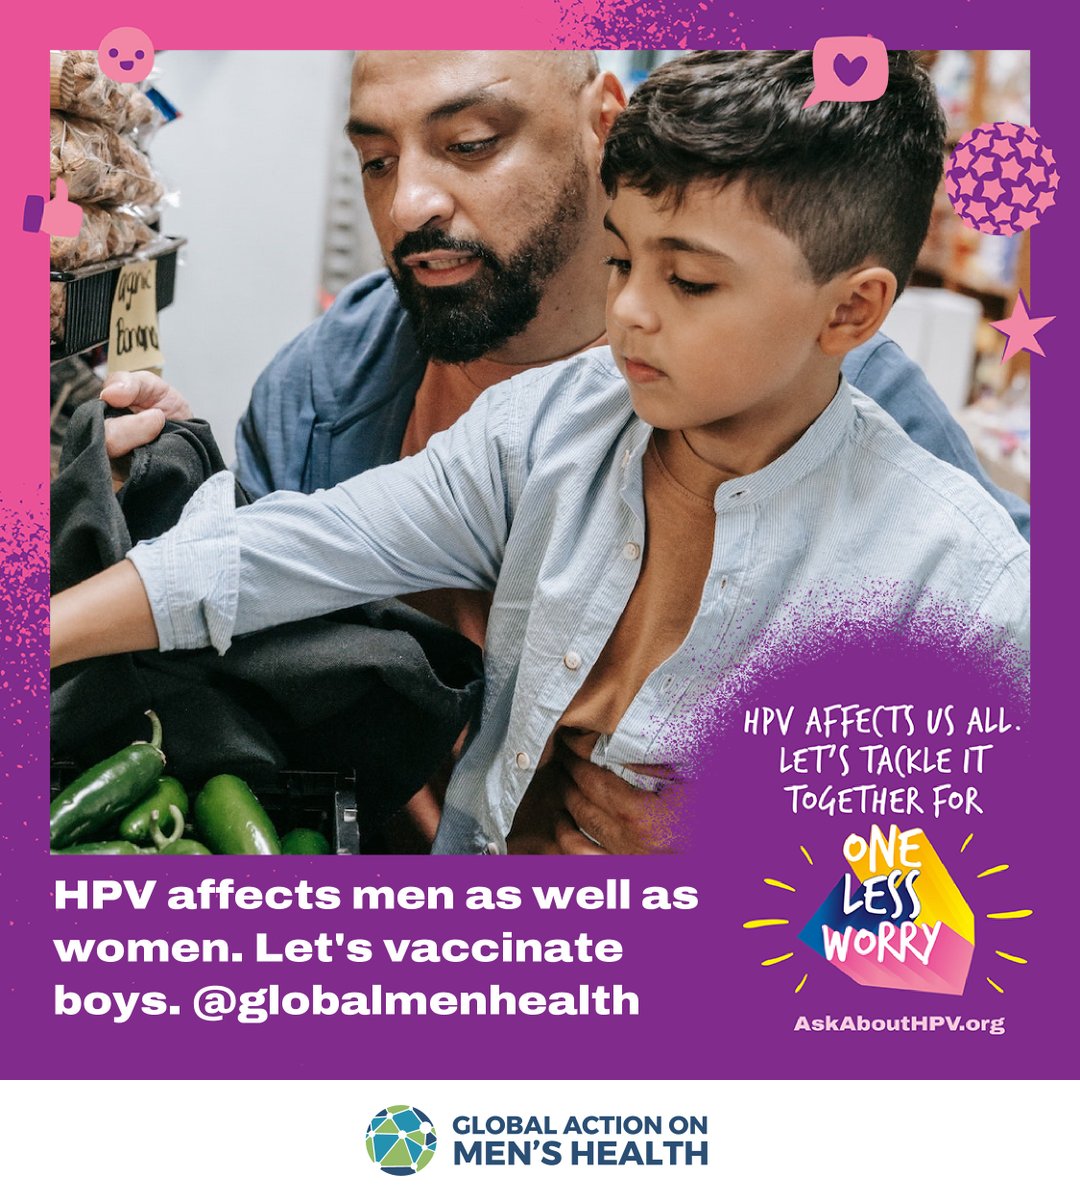 80% of us will have HPV at some point in our lives. HPV can cause 6 different types of cancer. Getting vaccinated against HPV protects you and others from the virus and from the cancers it can cause #hpvawarenessday #hpvaction askabouthpv.org